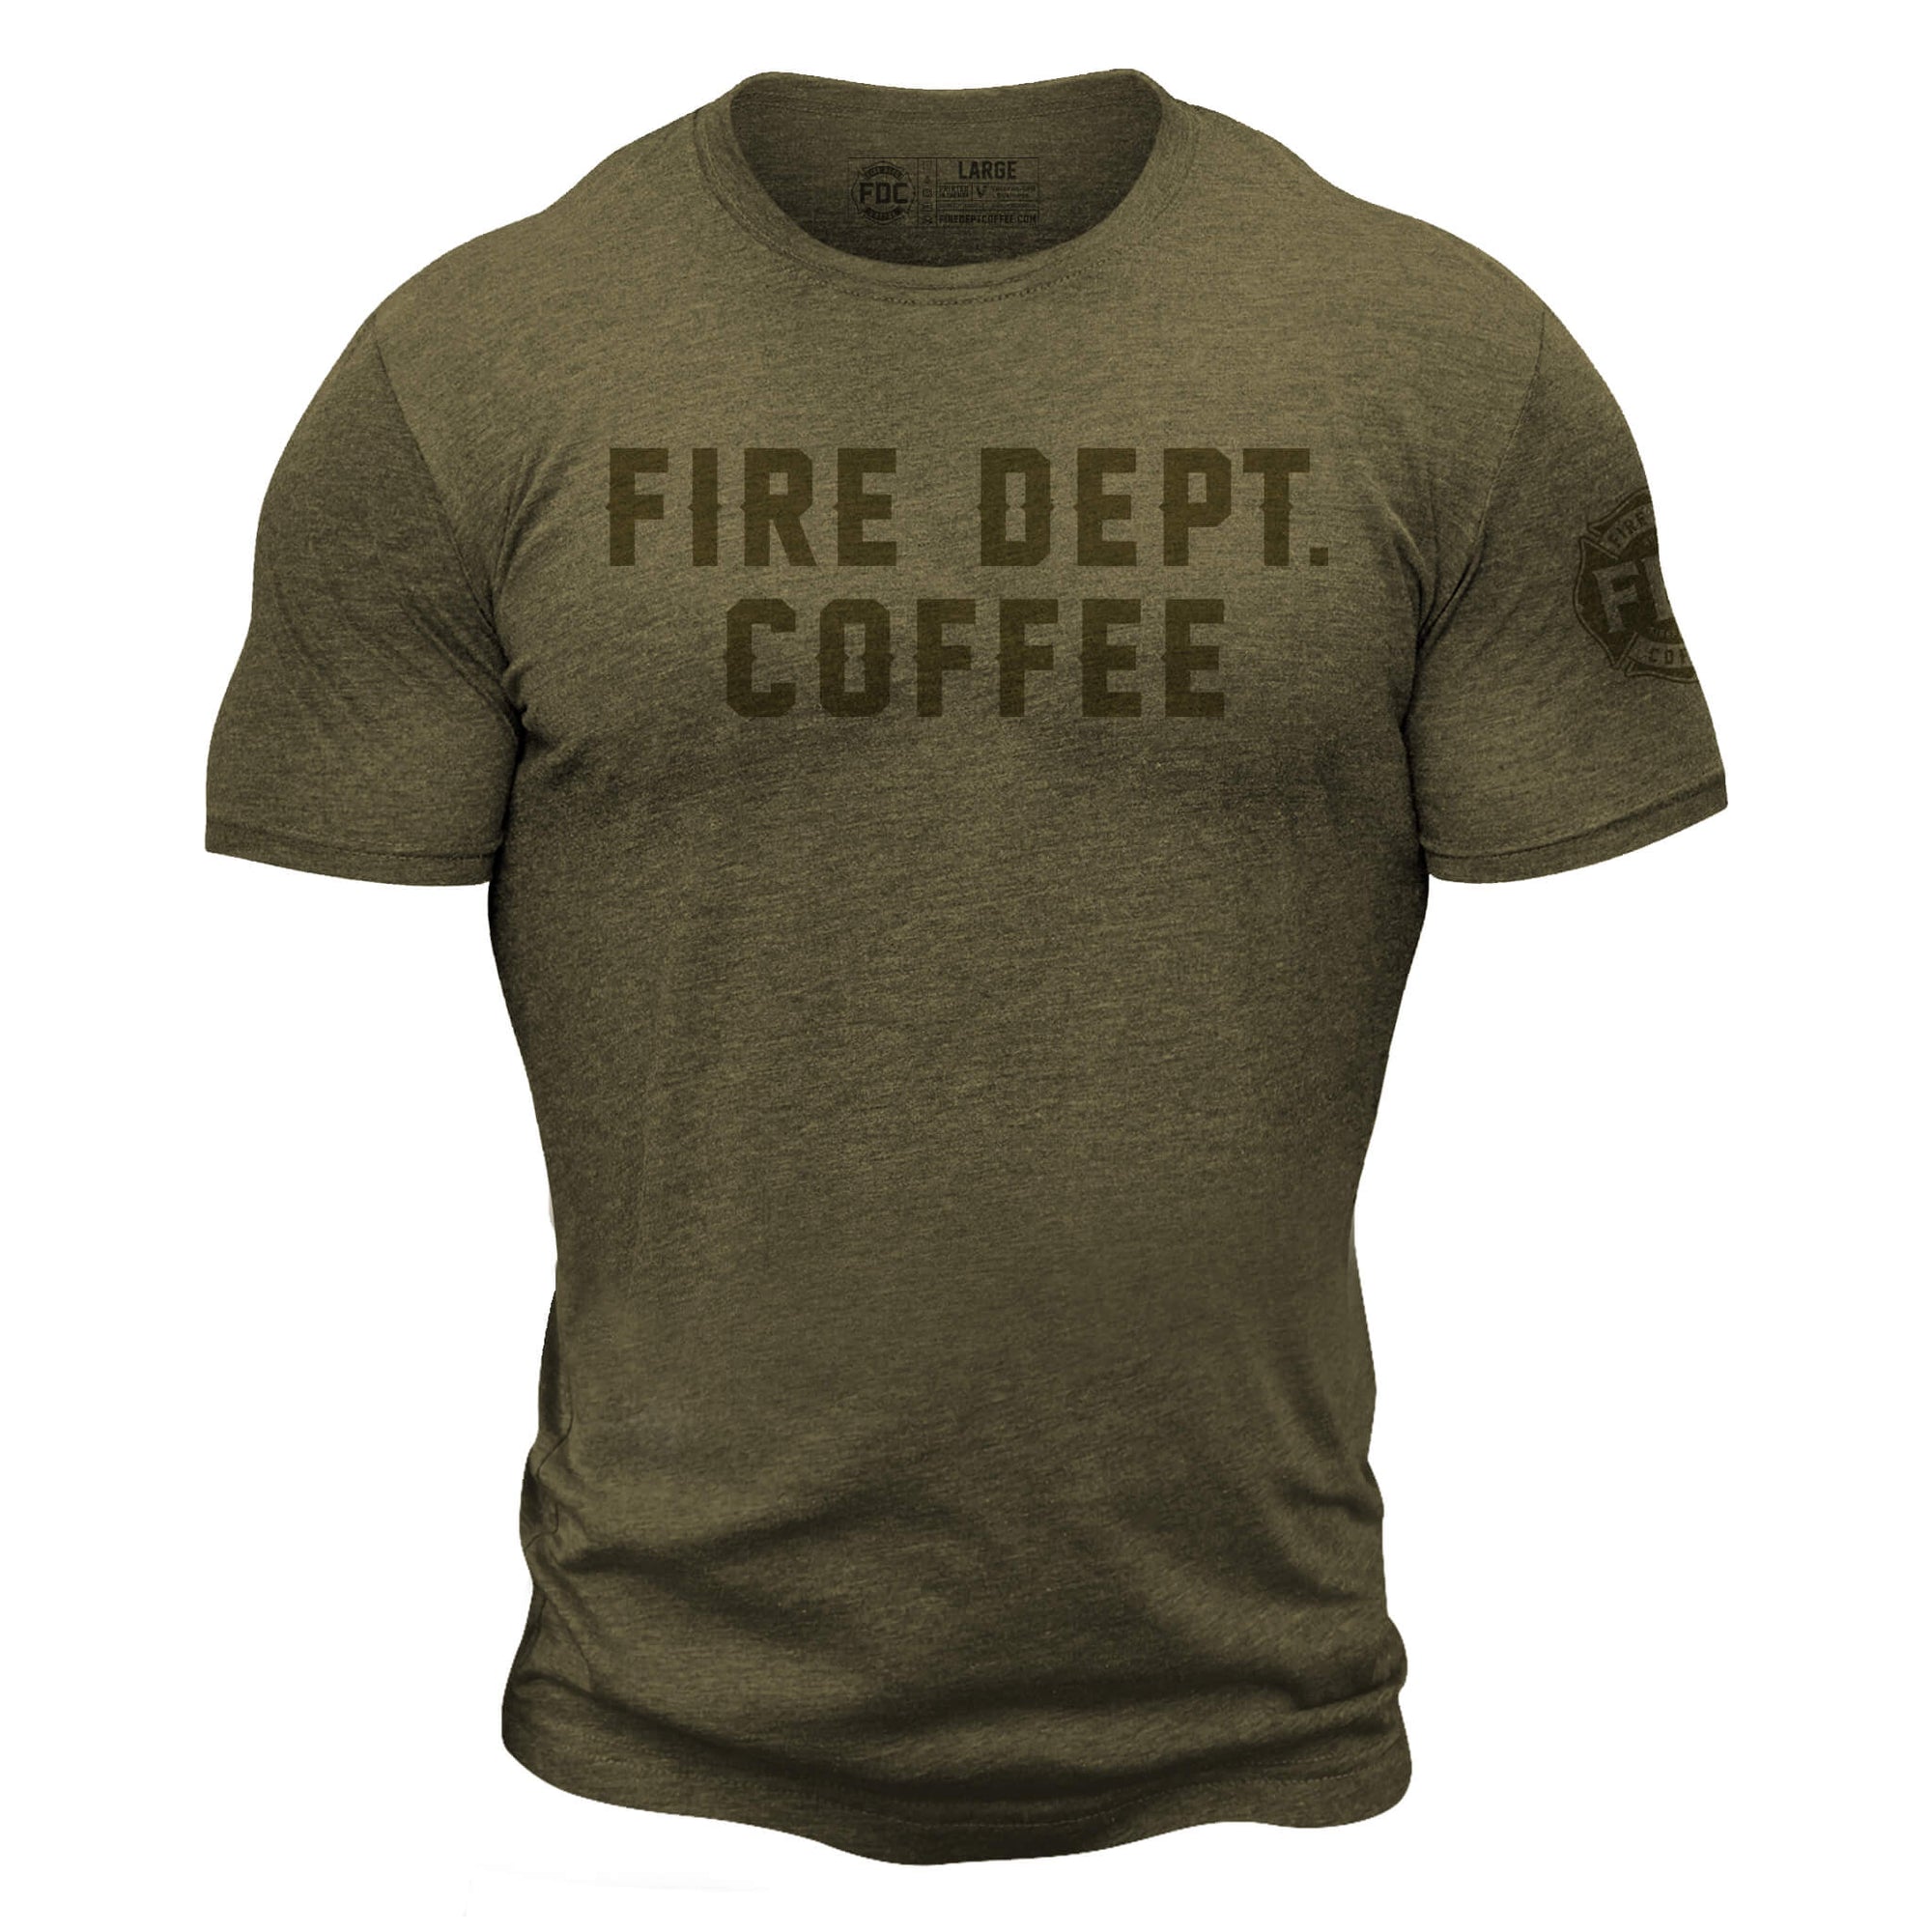 Military green short sleeve t shirt with "Fire Dept. Coffee" in large letters across the chest and the FDC maltese cross logo on the sleeve 